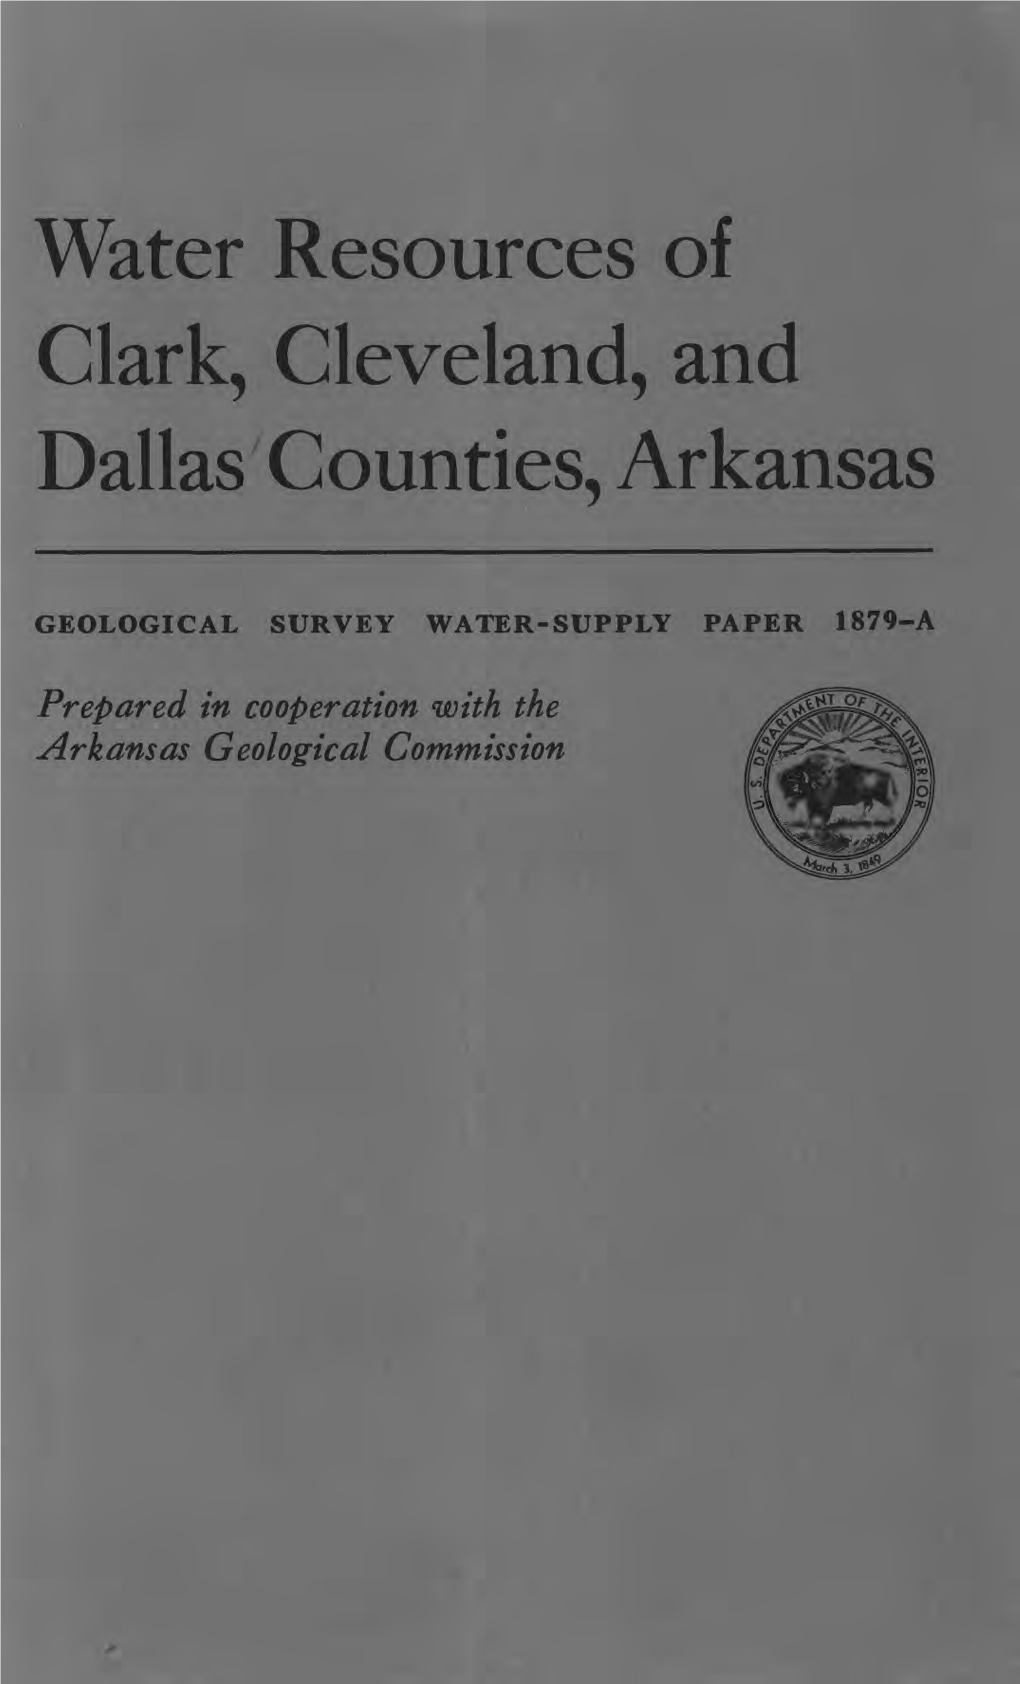 Water Resources of Clark, Cleveland, and Dallas Counties, Arkansas